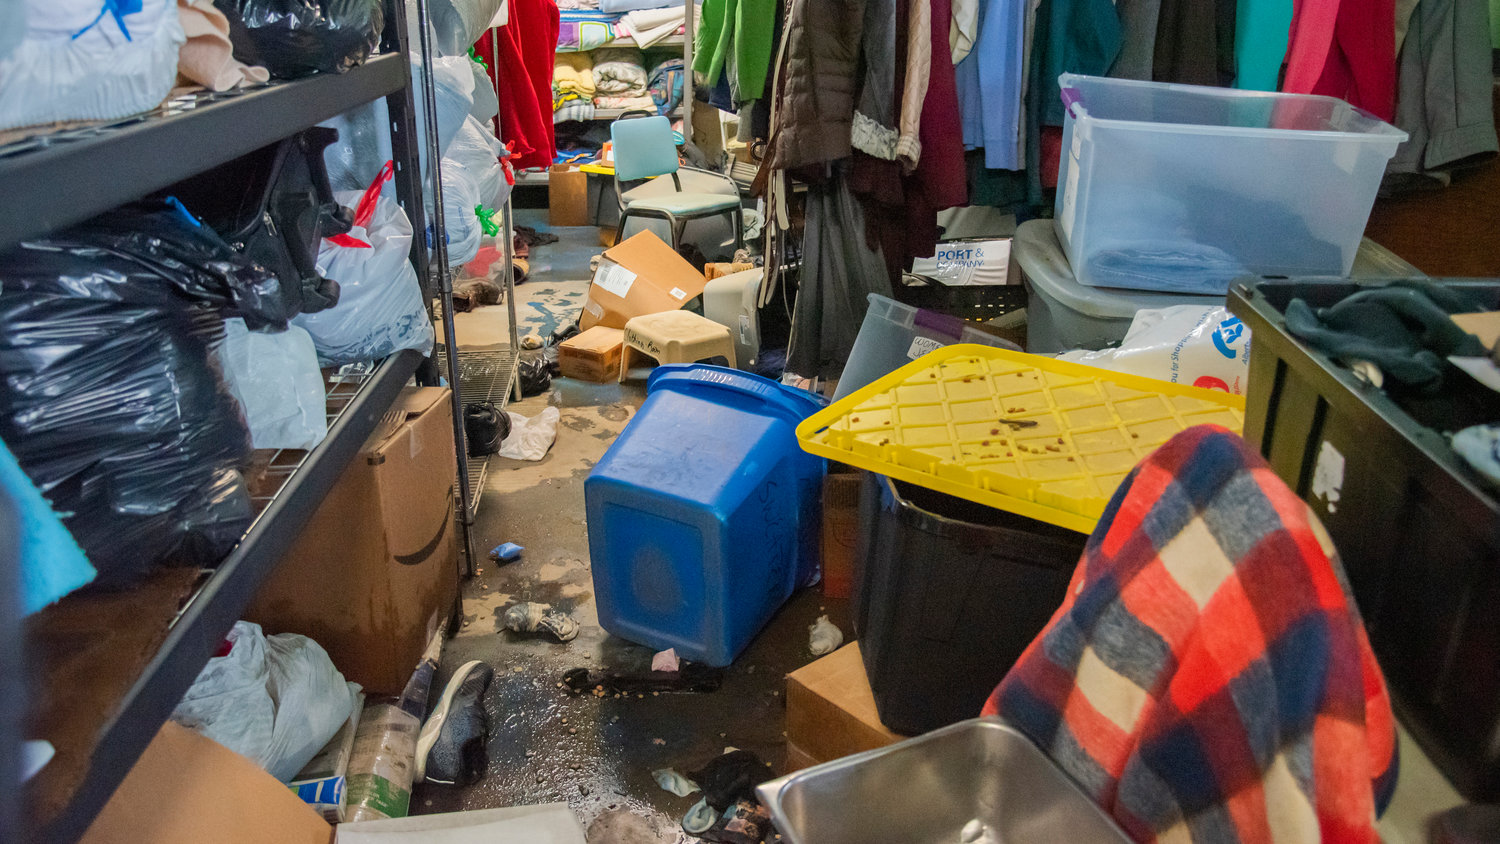 Boxes of donated clothing and animal food are seen scattered on Monday after flood waters toppled shelves and items stacked inside Lewis County Gospel Mission.